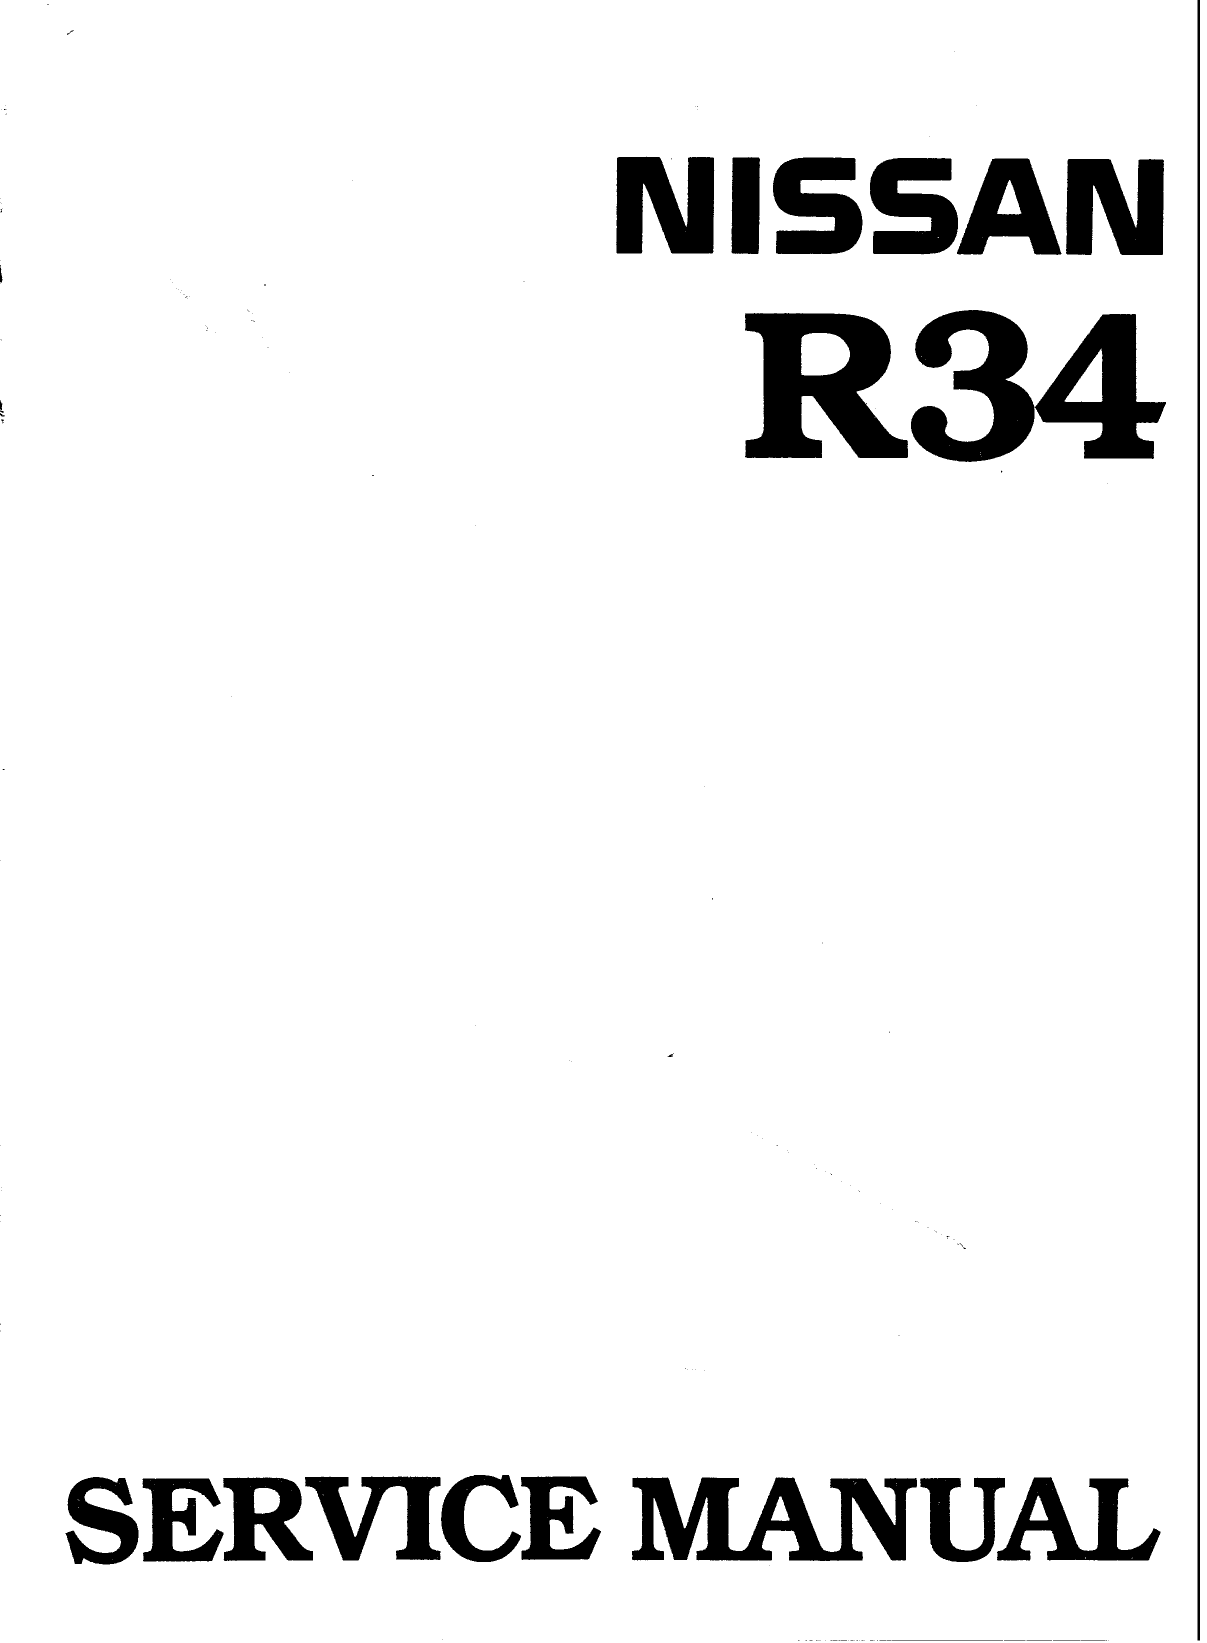 1998-2002 Nissan Skyline R34 service manual Preview image 6